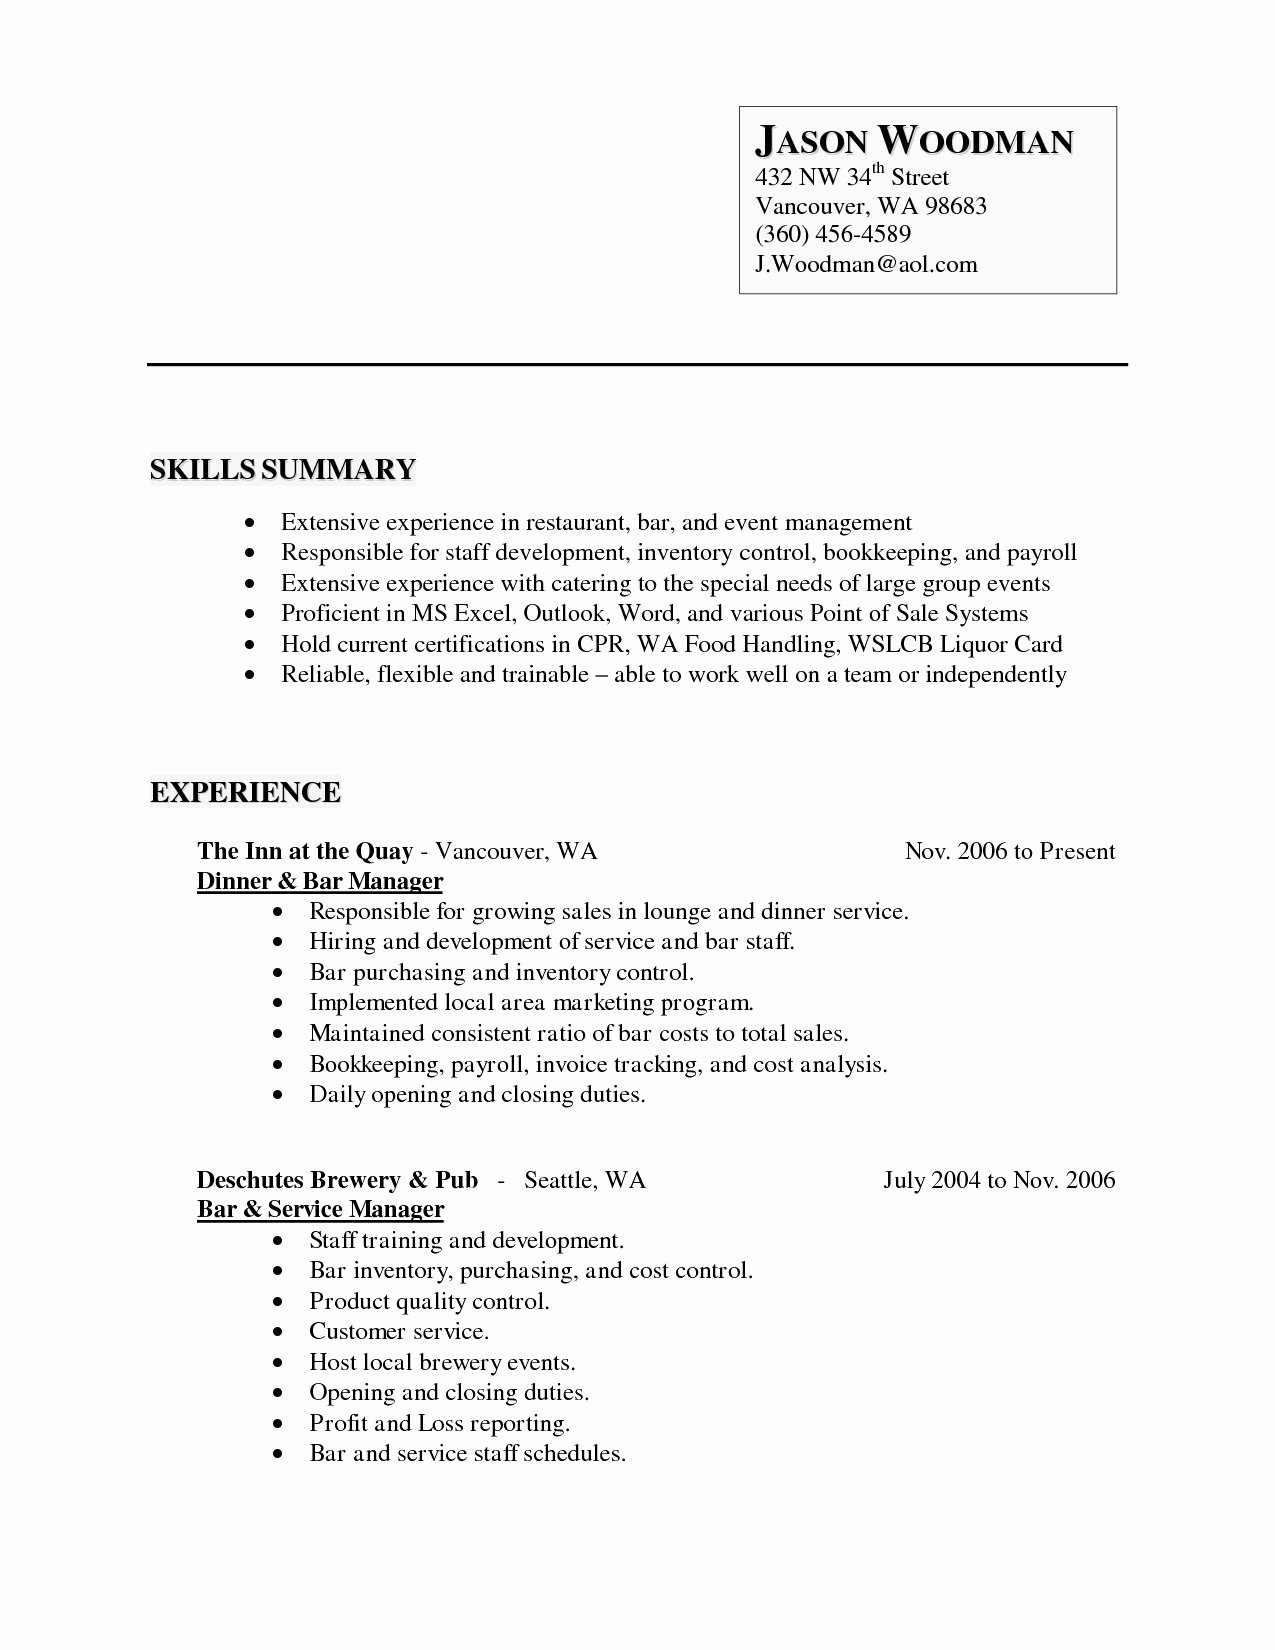 Lovely Ms Word Resume Templates 2015 Resume Ideas